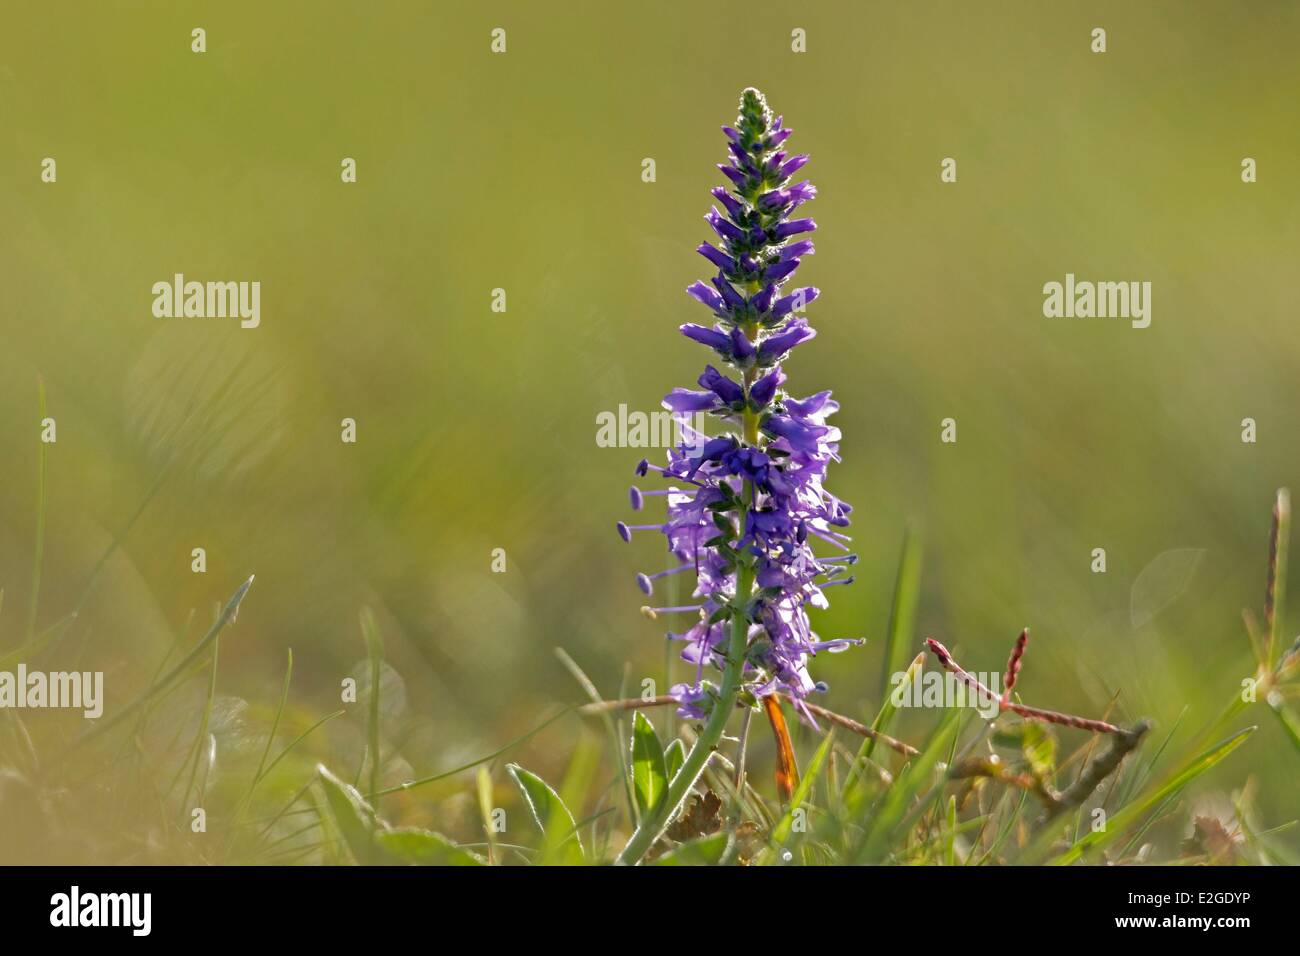 France Manche Vauville (Veronica spicata) protected in Basse Normandie Stock Photo